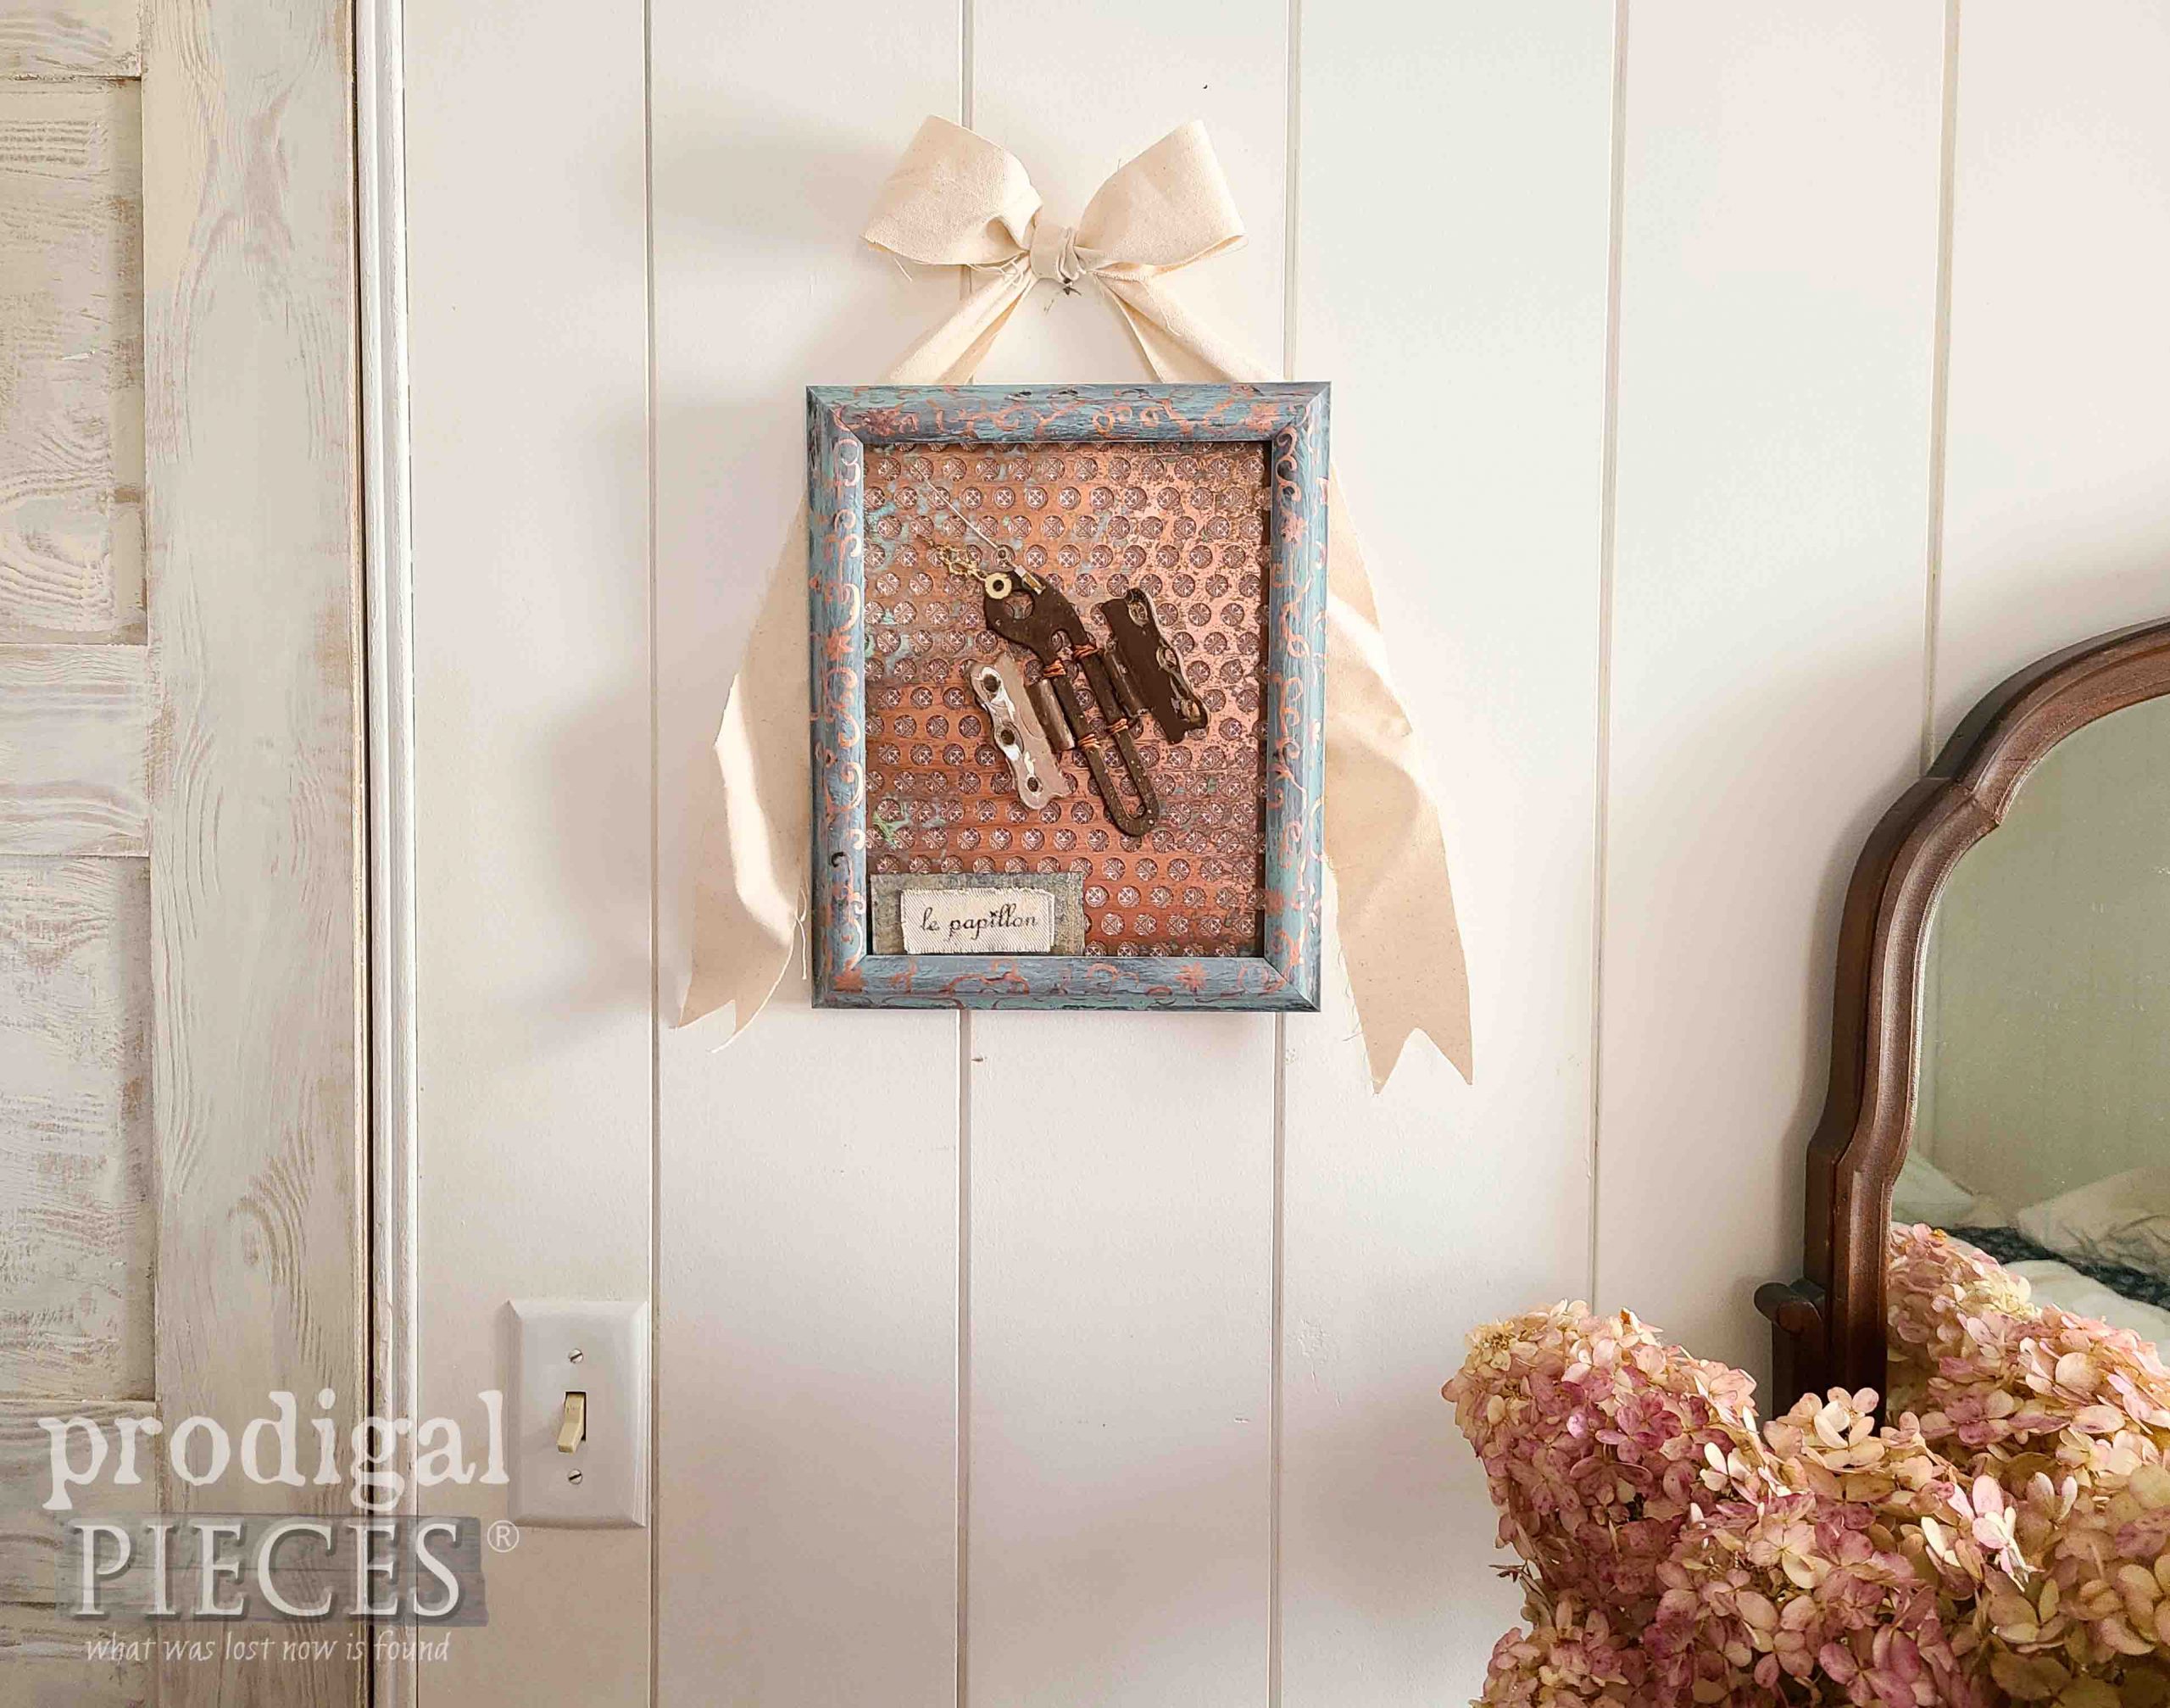 Salvaged Metal Art Butterfly Wall Art in Thrifted Picture Frame by Larissa of Prodigal Pieces | prodigalpieces.com #prodigalpieces #art #handmade #home